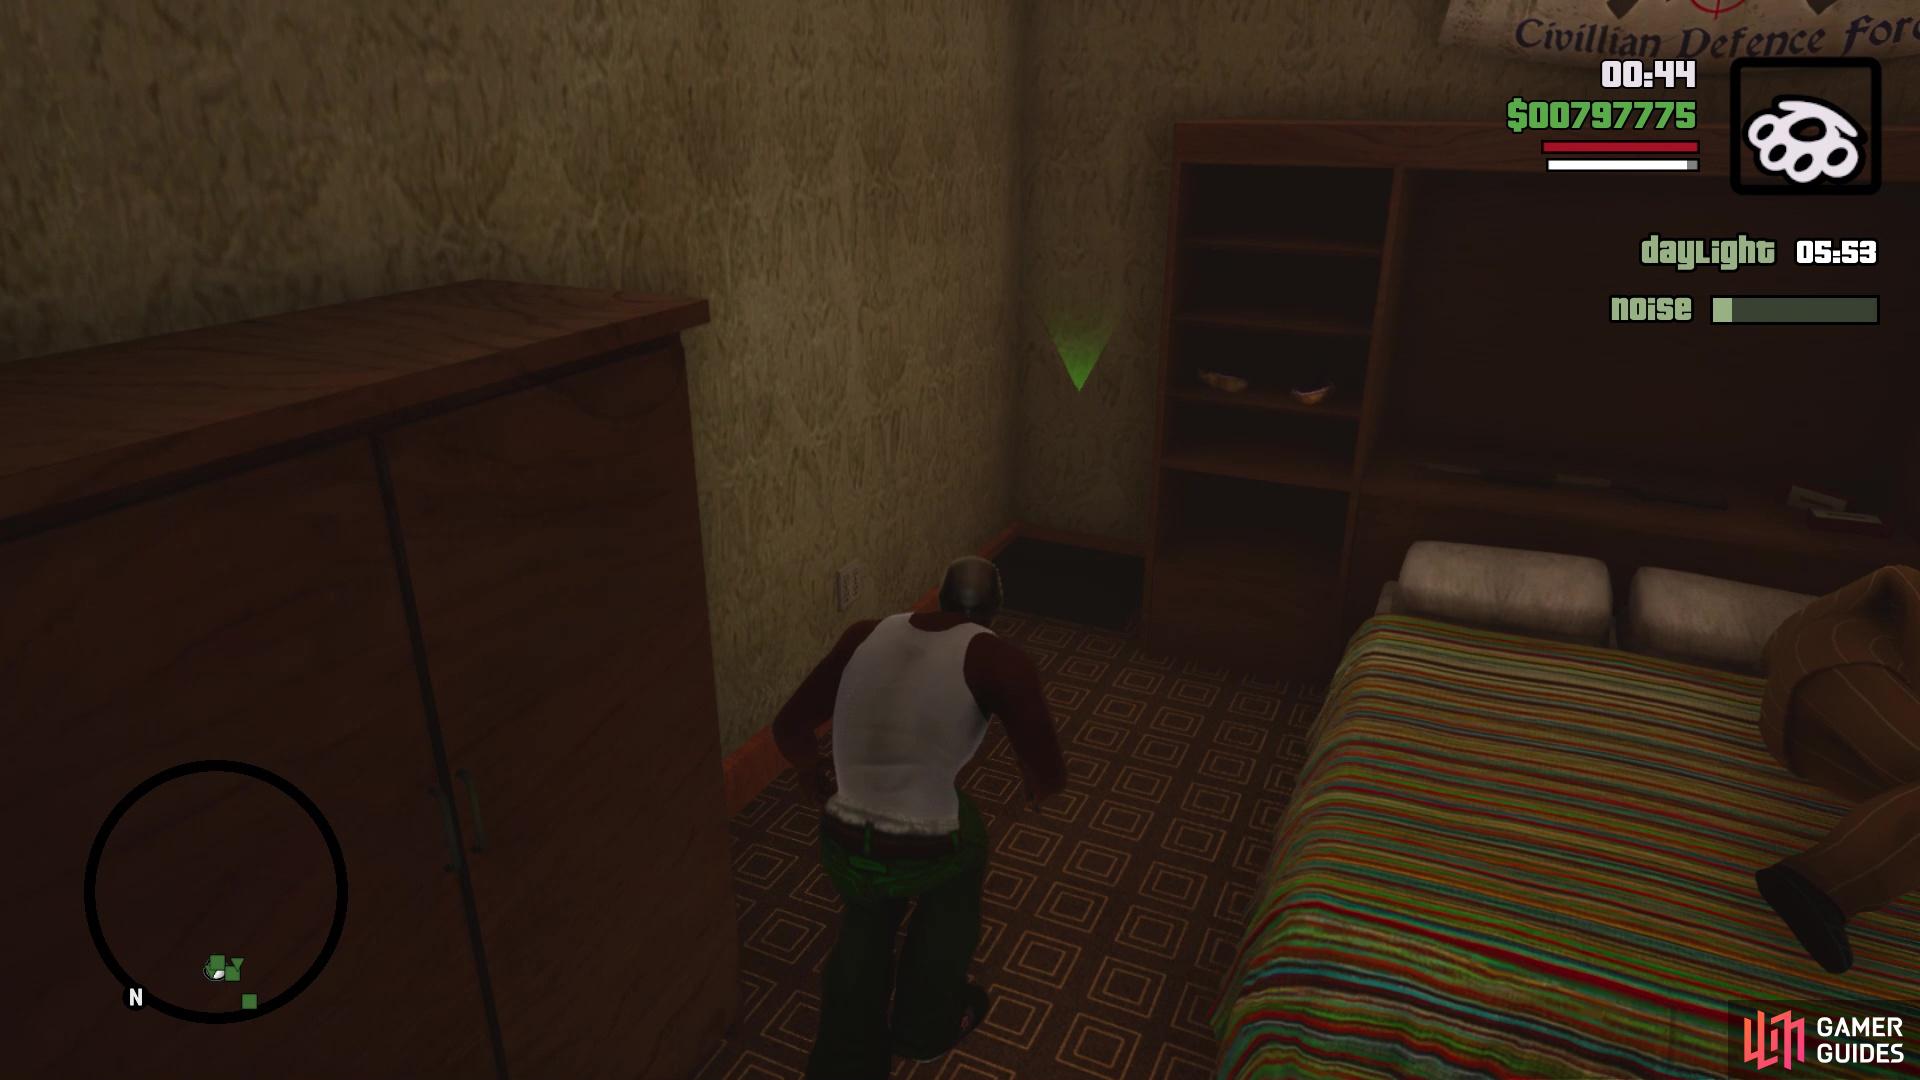 This crate is located in the owner's bedroom